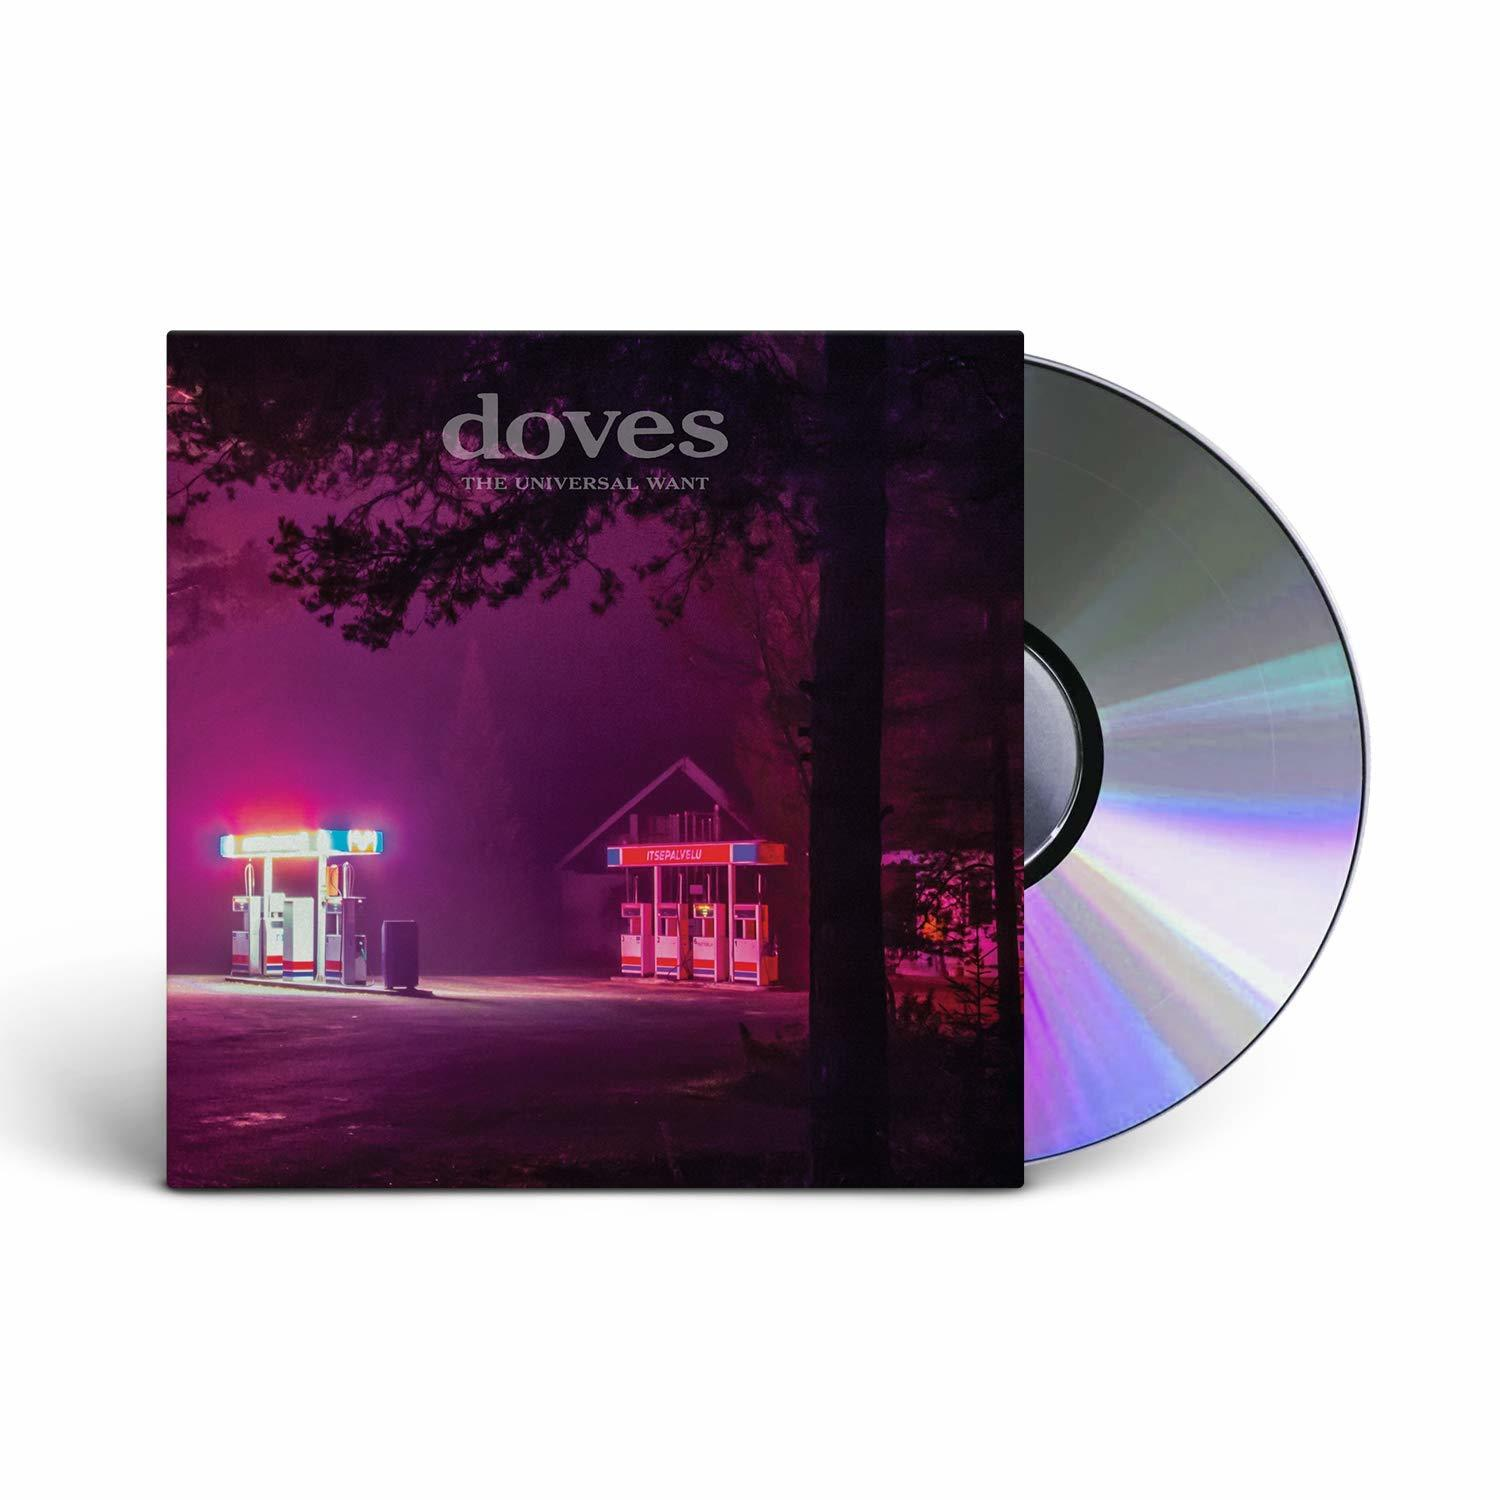 (CD) - Universal Doves - Want The